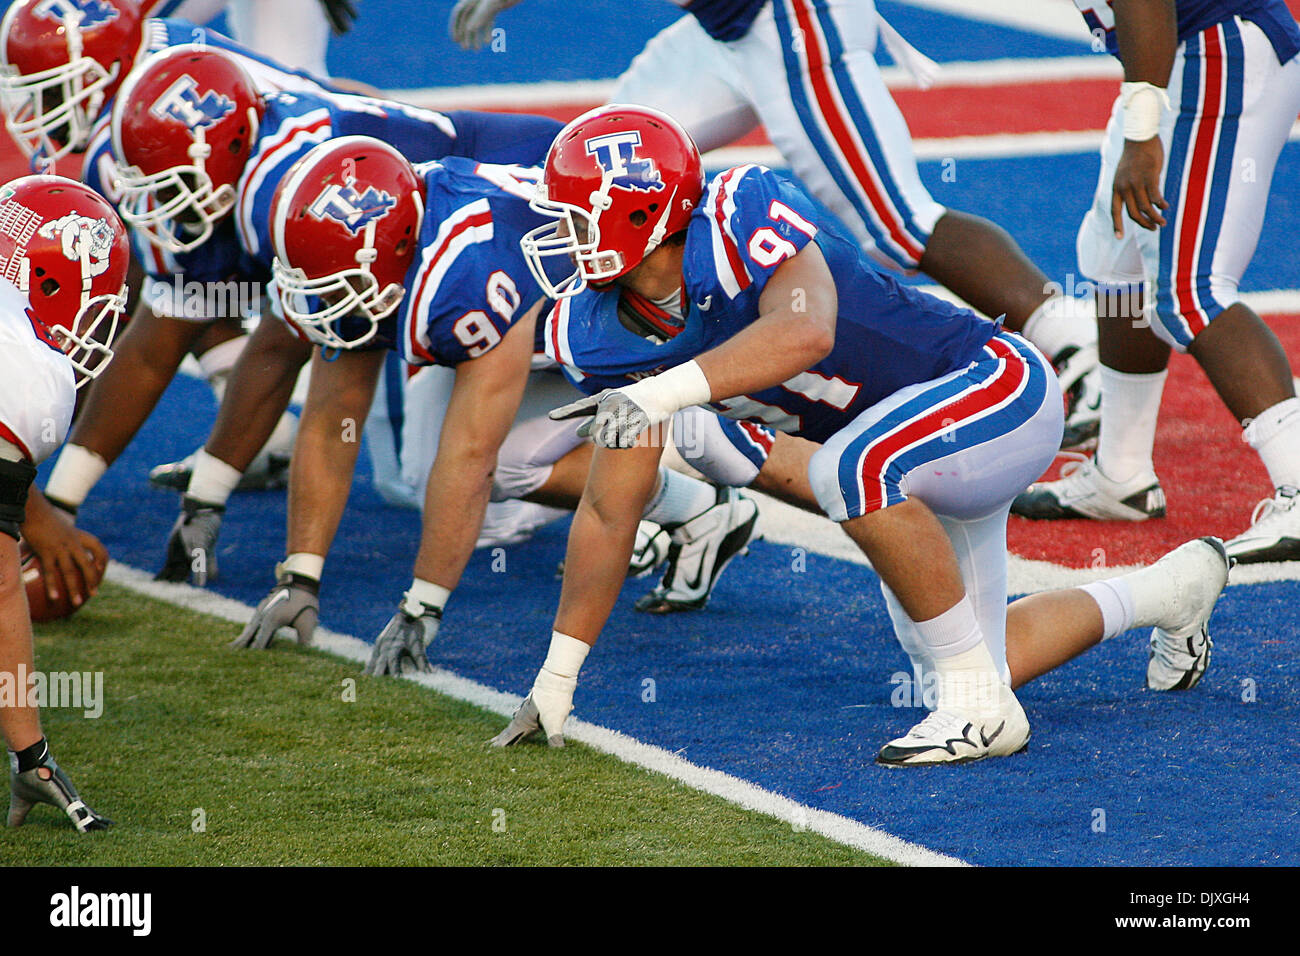 Oct 9, 2010: The Louisiana Tech defense including Louisiana Tech Bulldogs defensive end Matt Broha (91) and Louisiana Tech Bulldogs defensive tackle Mason Hitt (90) line up for a goal line stance during game action between the Fresno State Bulldogs and the Louisiana Tech Bulldogs at Joe Aillet Stadium in Ruston, Louisiana. Fresno State won 40-34. (Credit Image: © Donald Page/Southc Stock Photo